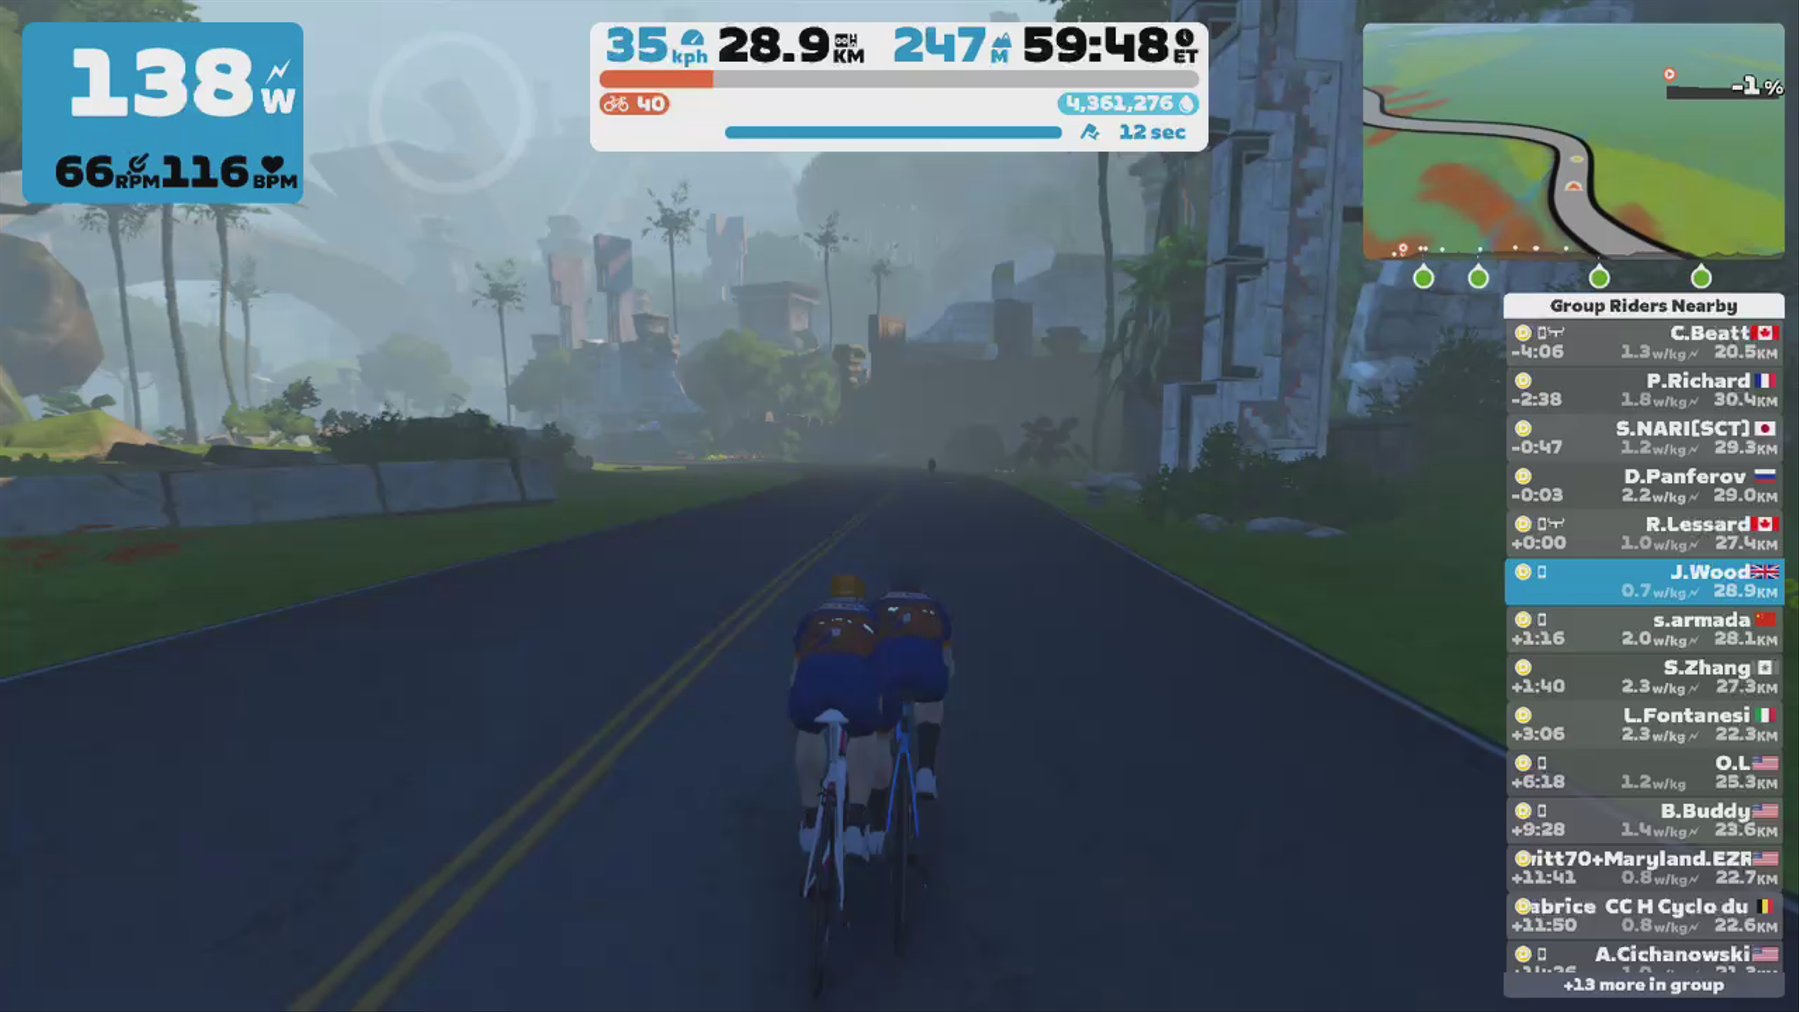 Zwift - Group Ride: Cyclo Cafe (D) on Canopies and Coastlines in Watopia